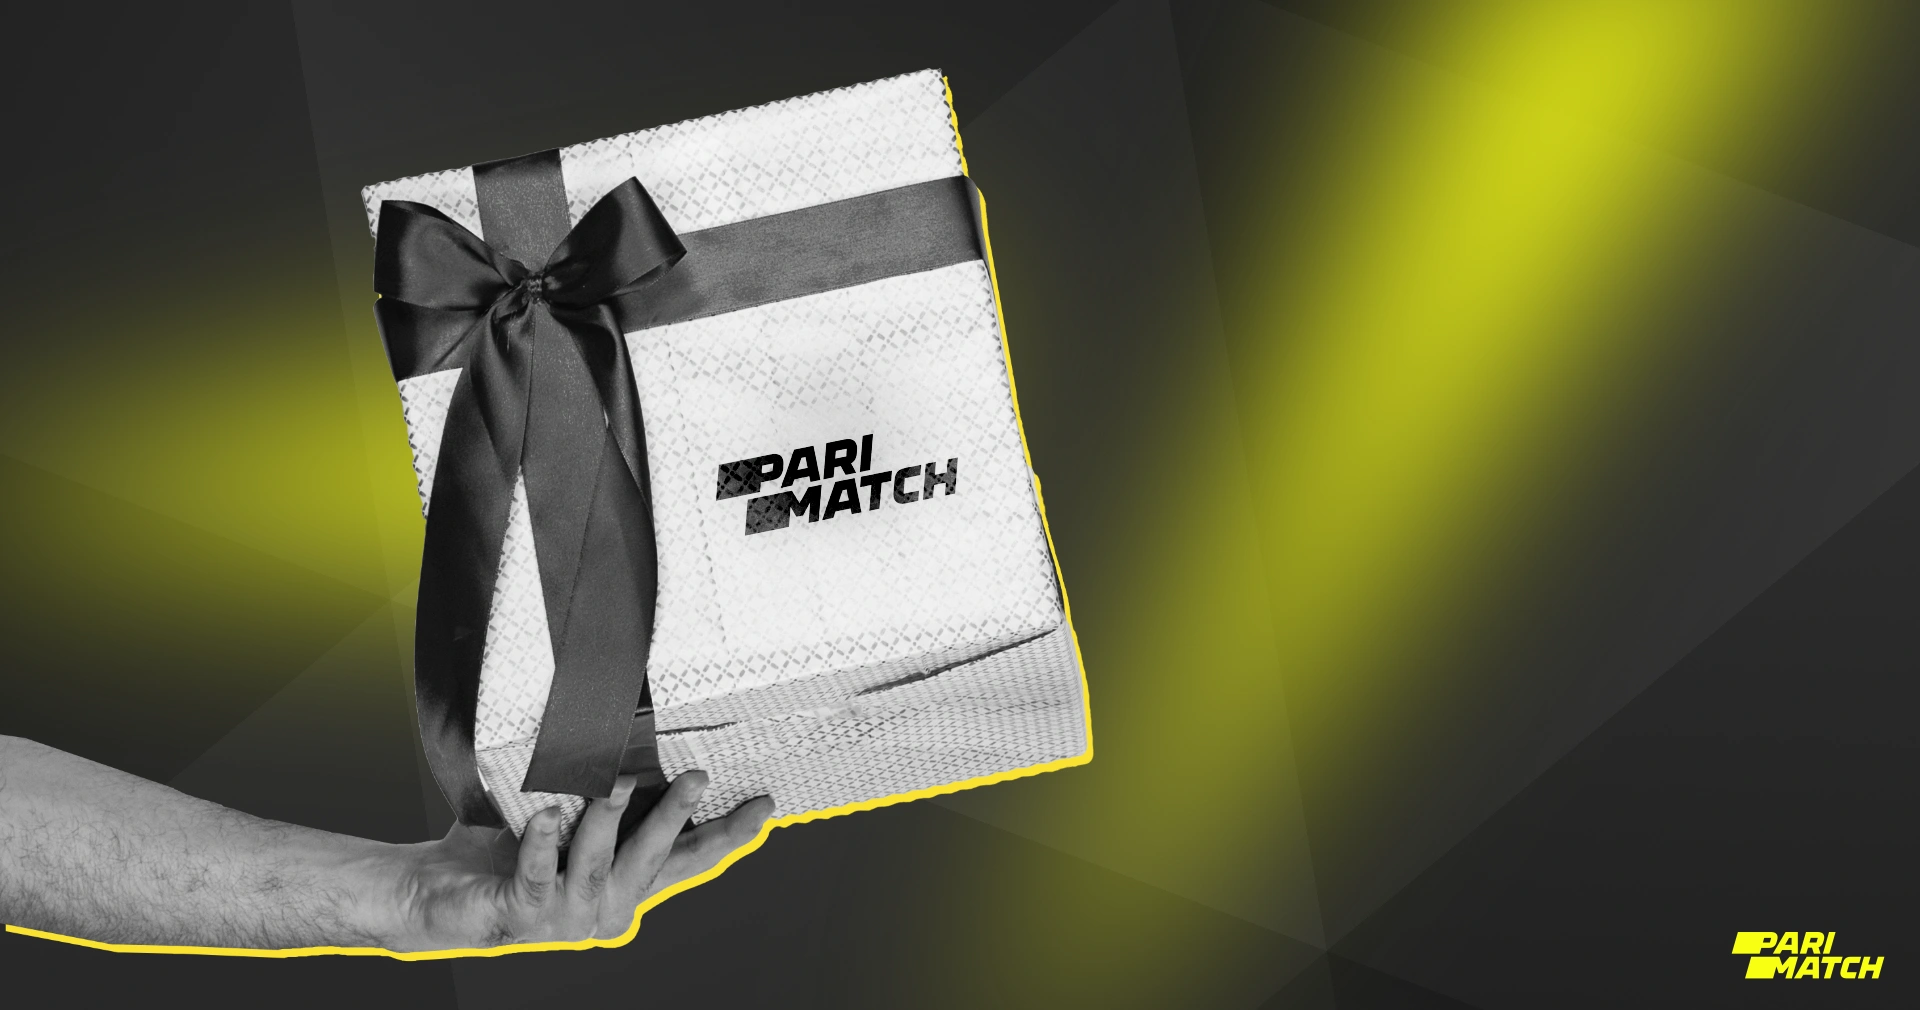 The Parimatch Welcome Bonus is for new players from Bangladesh